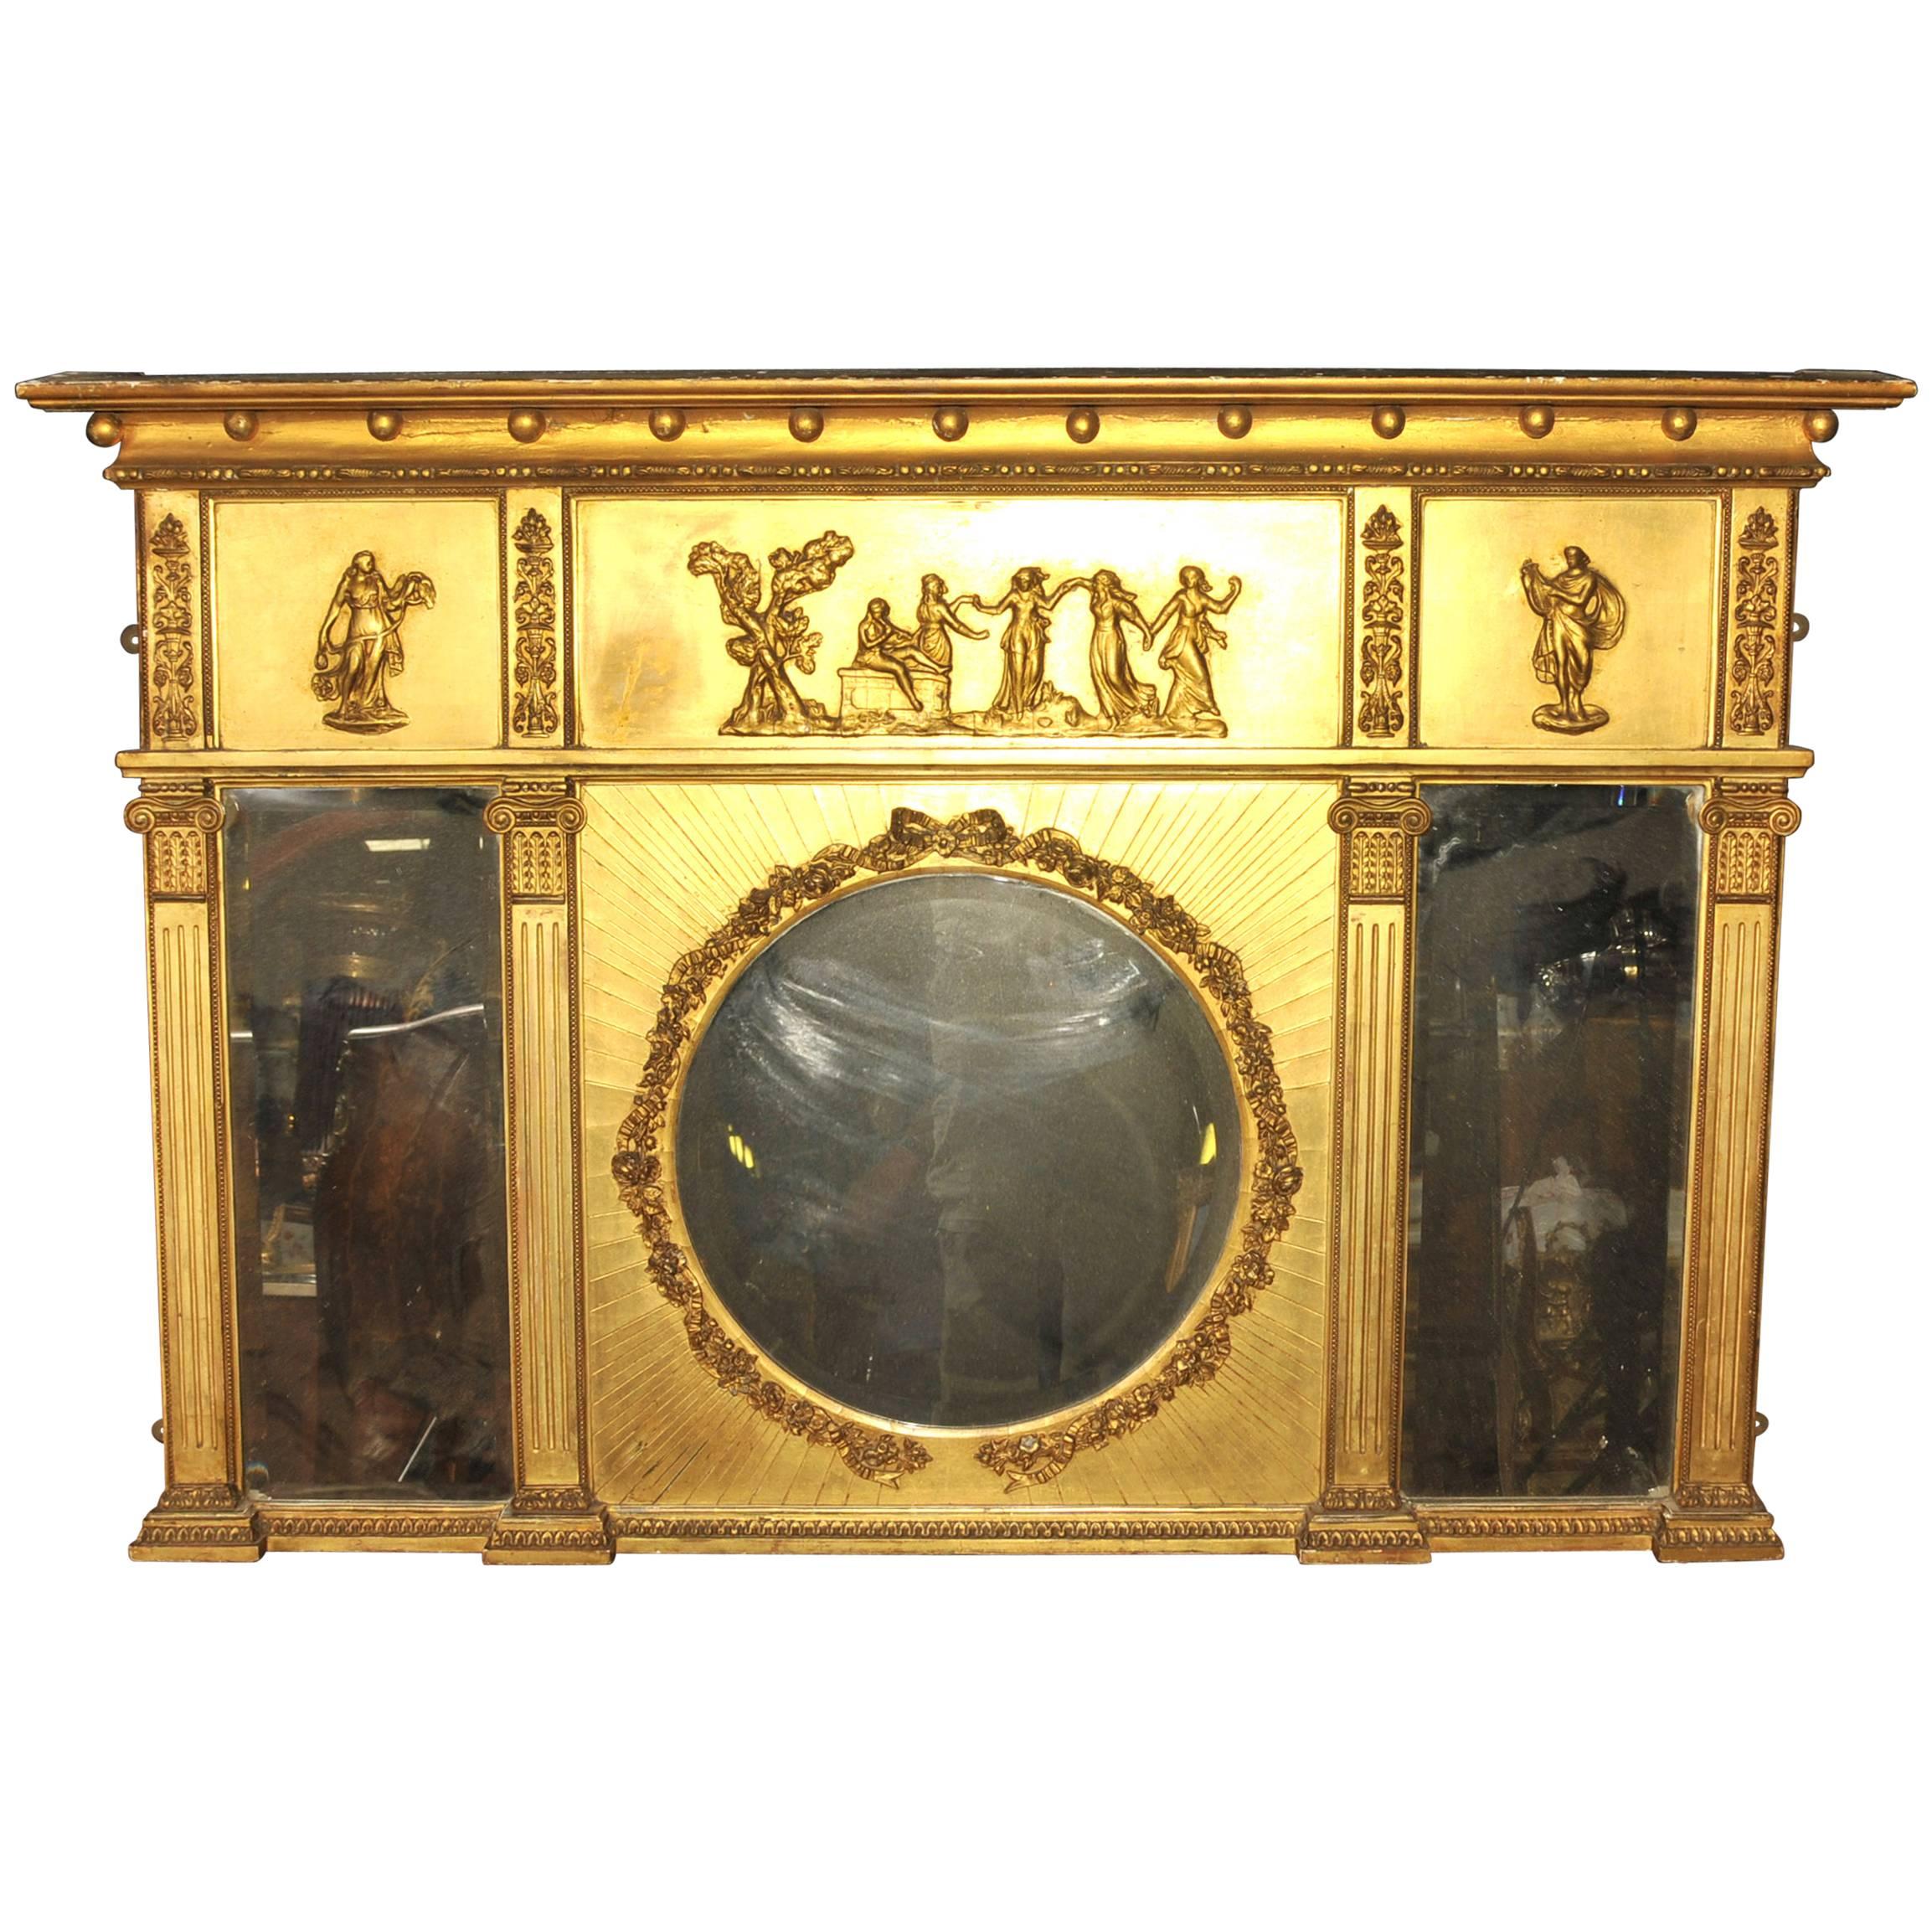 Antique Regency, 1815 Gilt Mantle Mirror English Mirrors For Sale